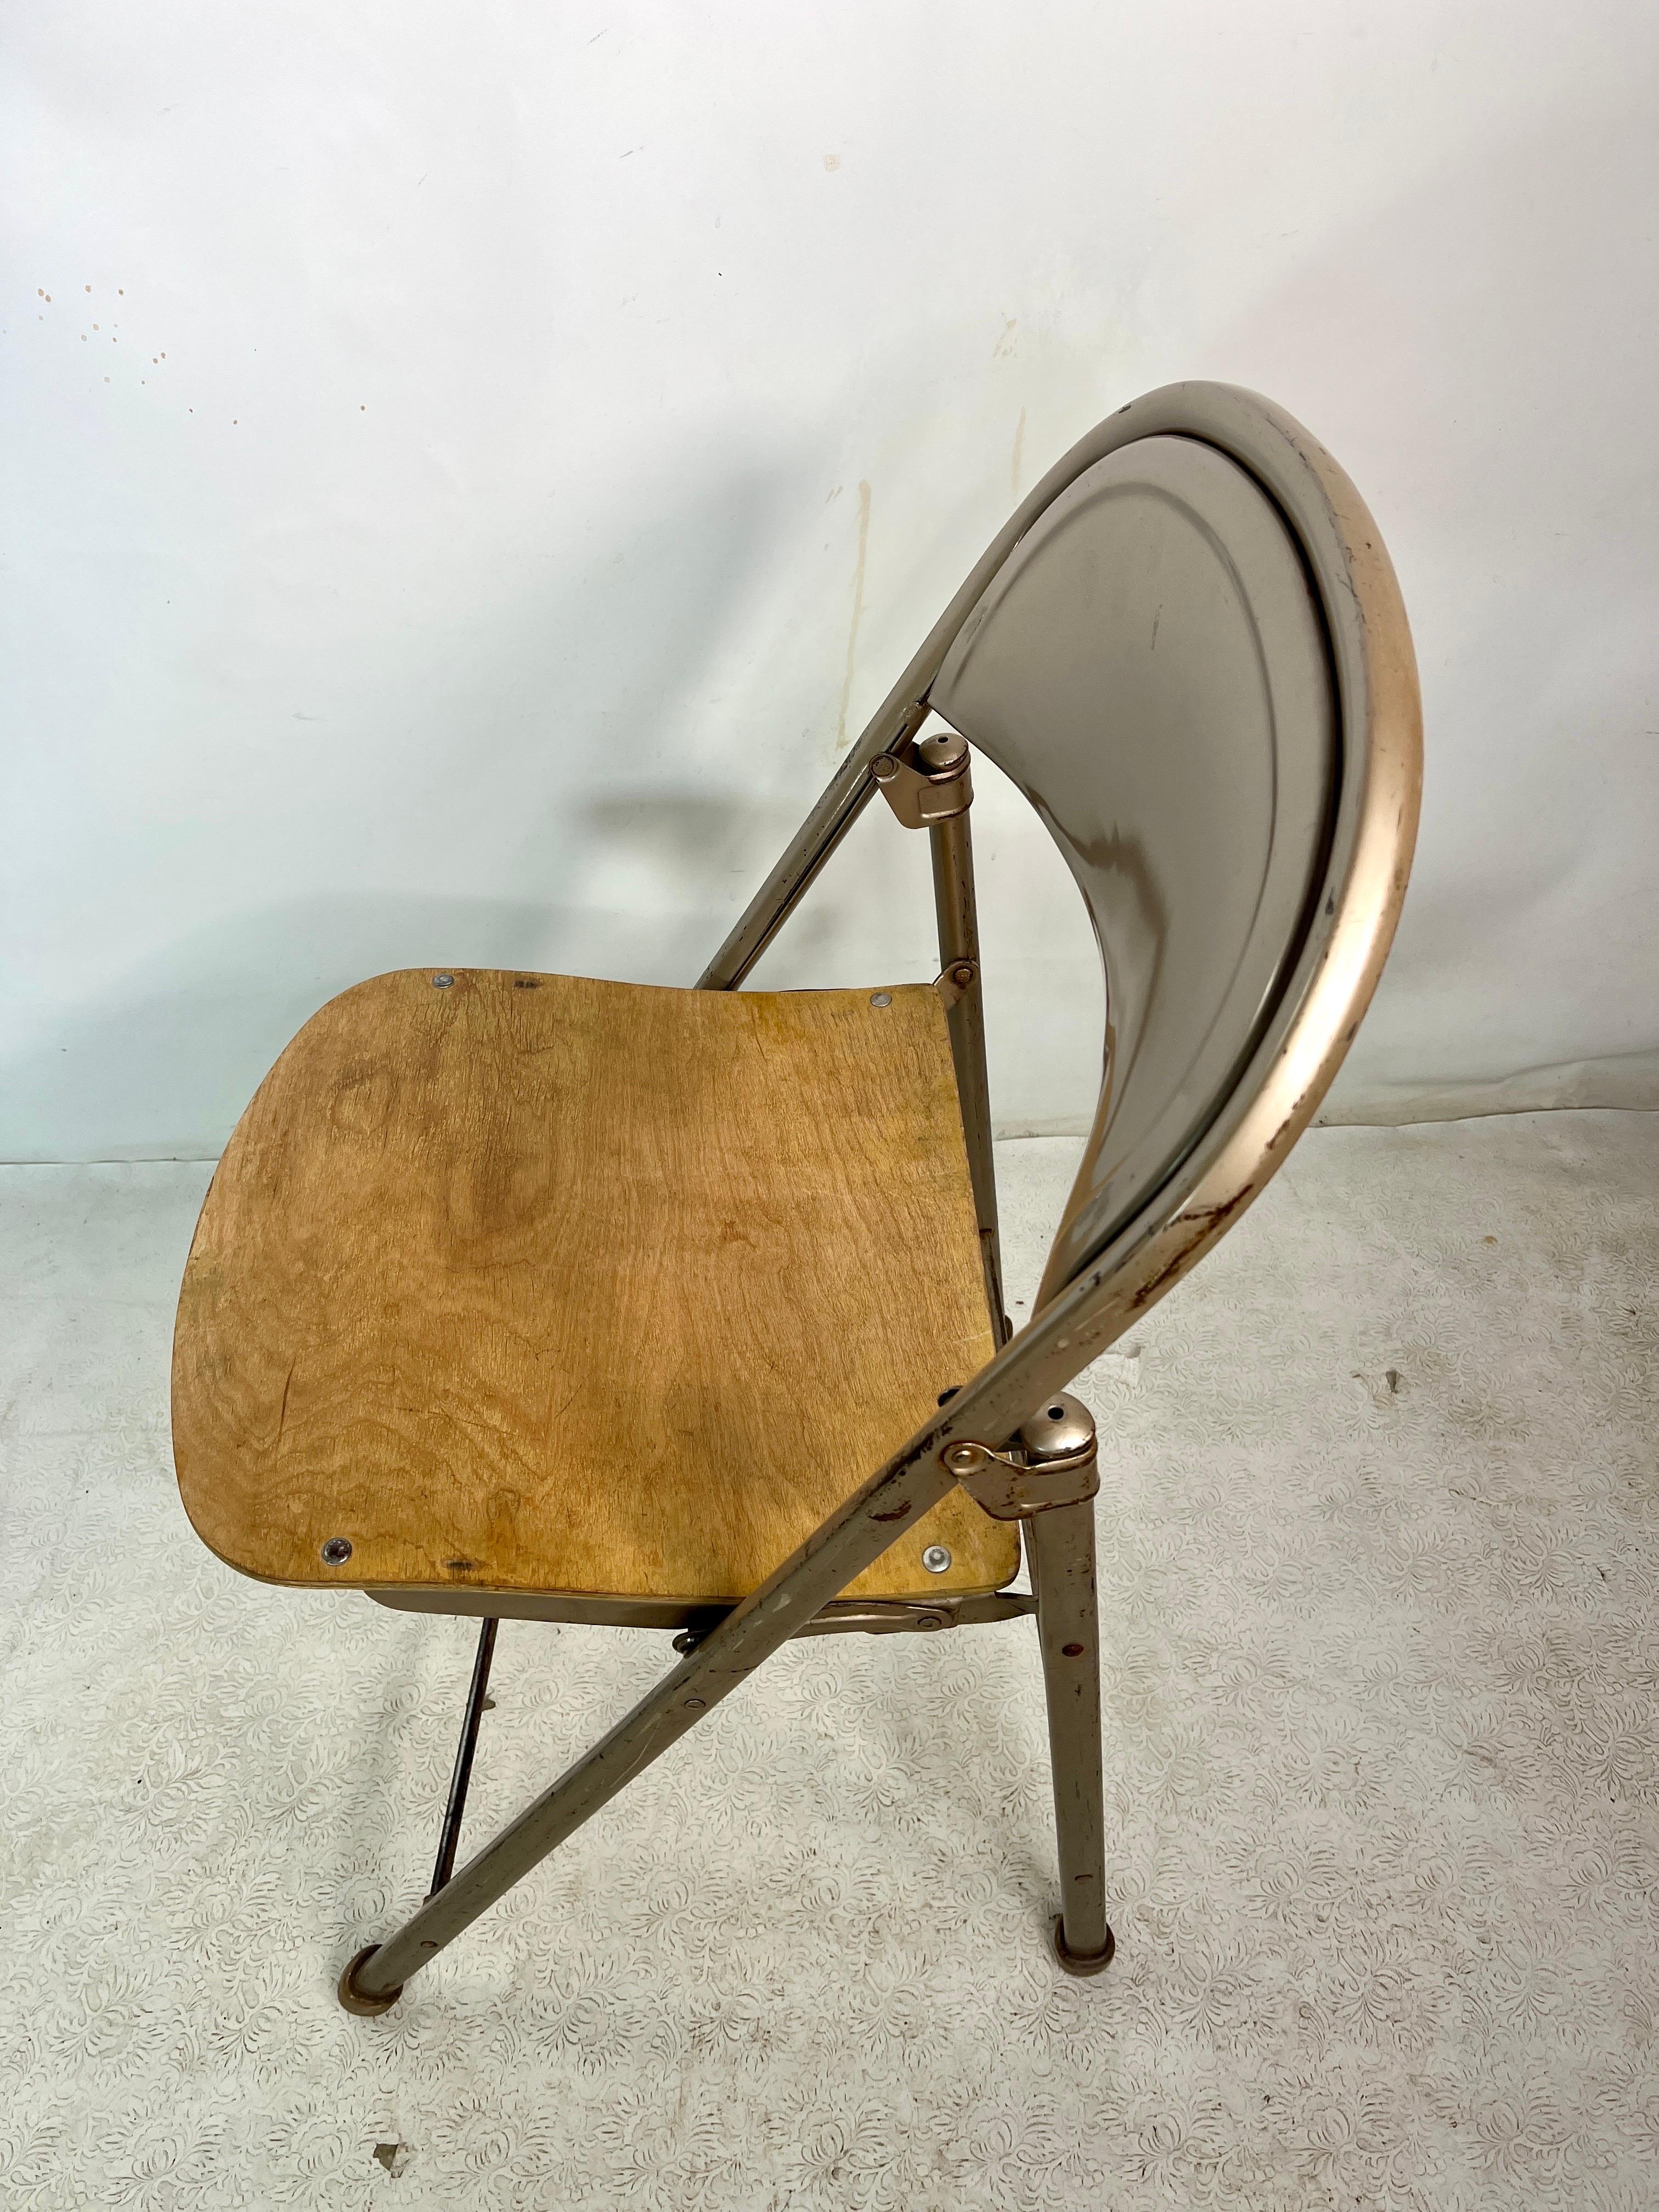 For sale is this nice vintage Folding midcentury industrial metal chair. We currently have 40 available at 95.00 each.